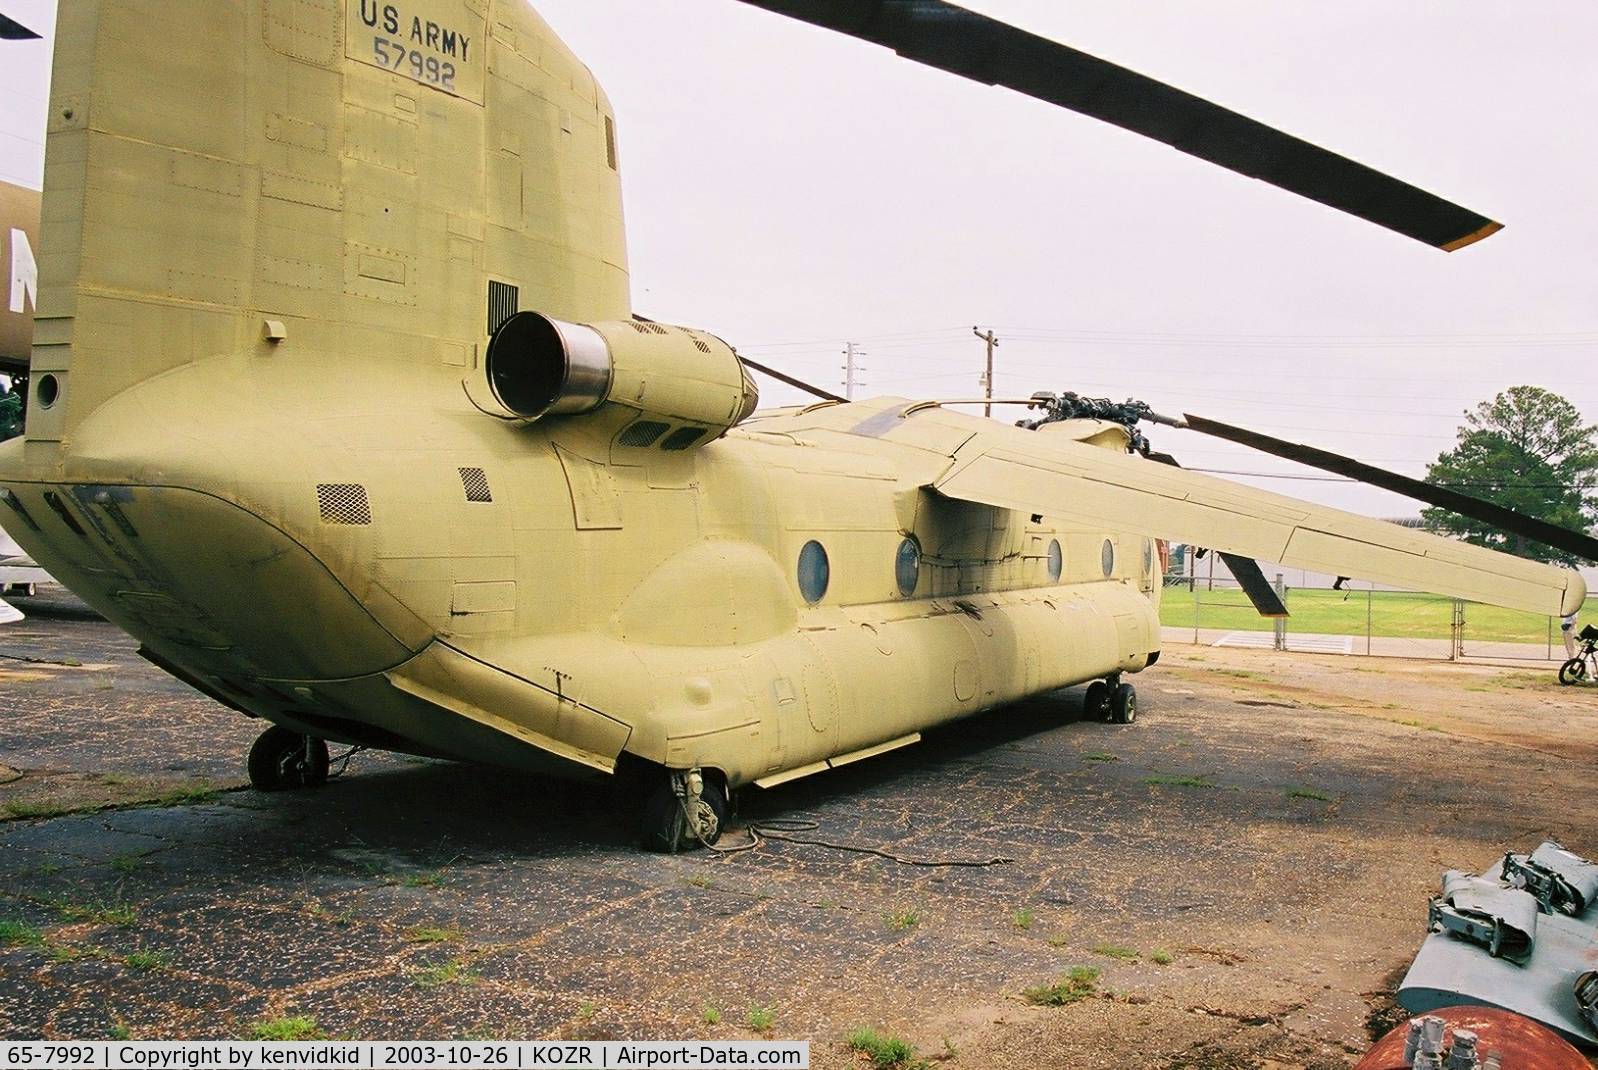 65-7992, 1965 Boeing Vertol CH-47A Chinook C/N B.164, At the Fort Rucker Museum storage compound.